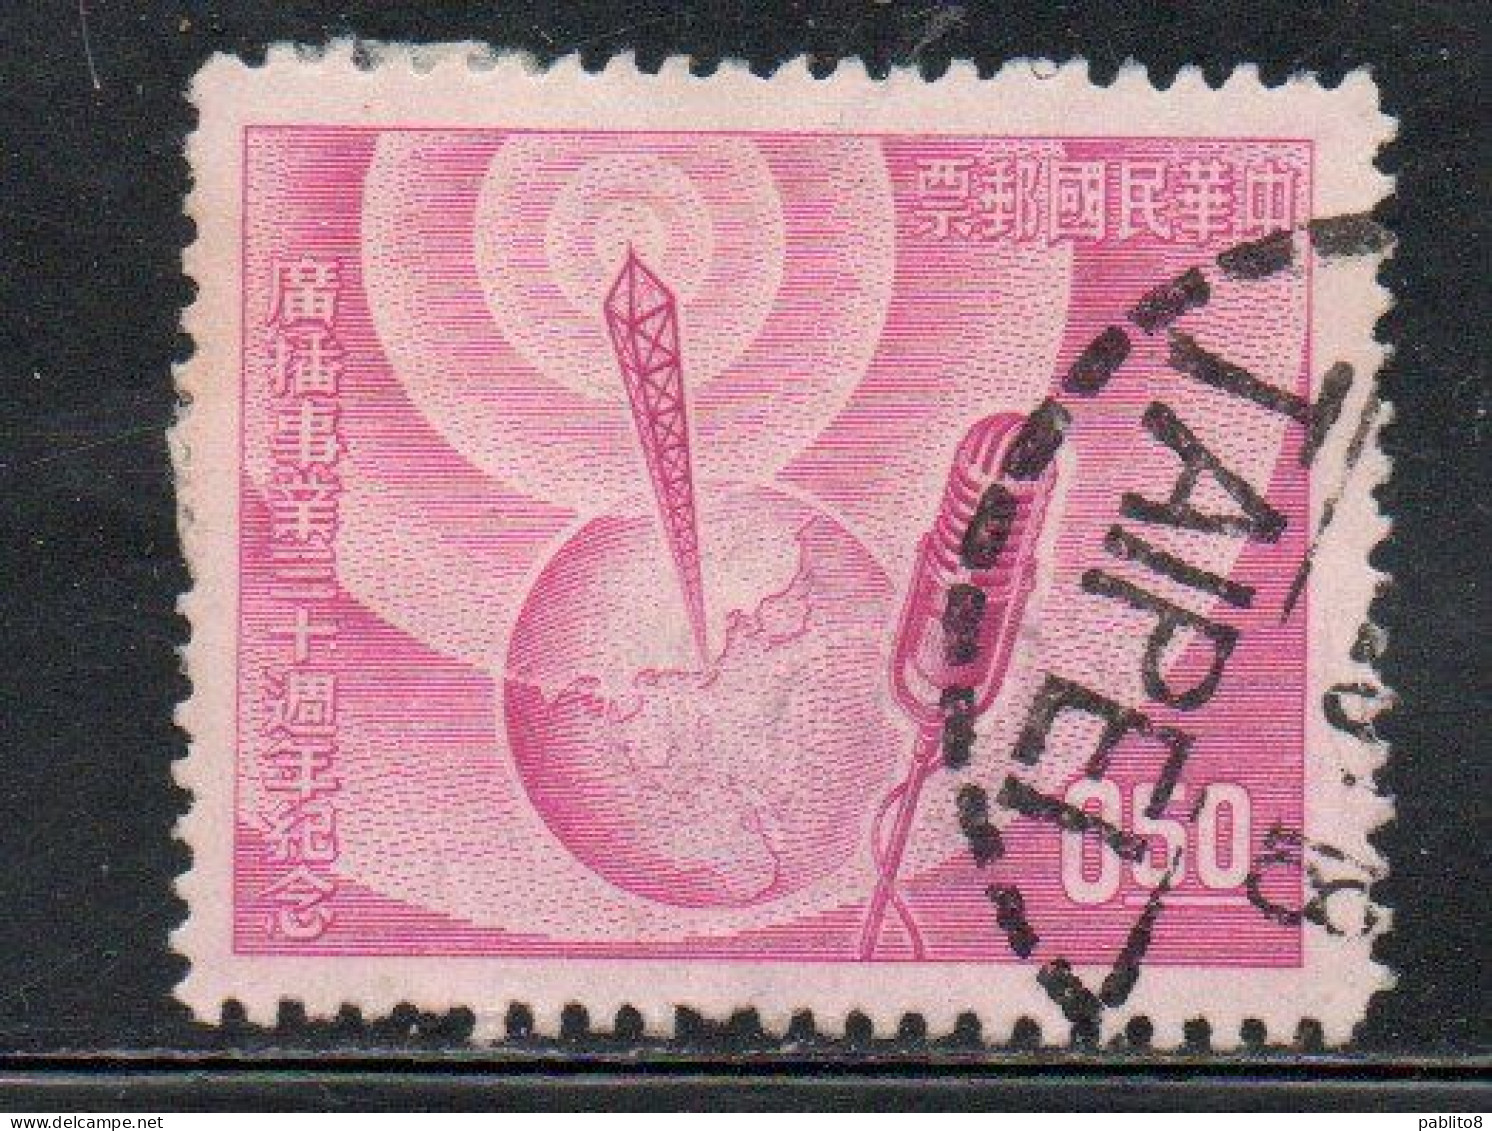 CHINA REPUBLIC CINA TAIWAN FORMOSA 1957 CHINESE BROADCASTING GLOBE RADIO TOWER MICROFONE 50c USED USATO OBLITERE' - Used Stamps